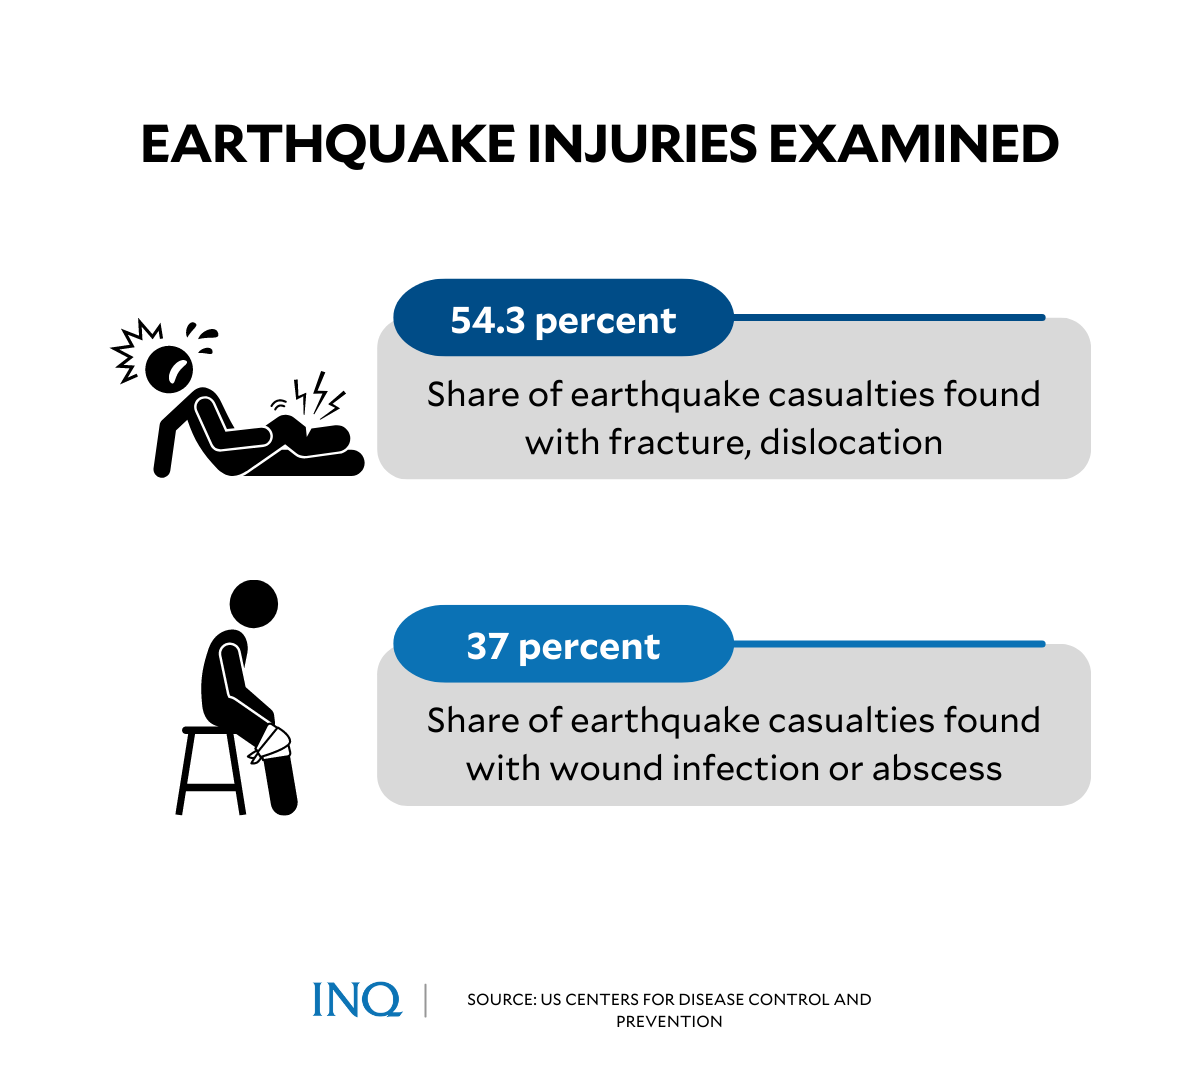 Earthquake injuries examined